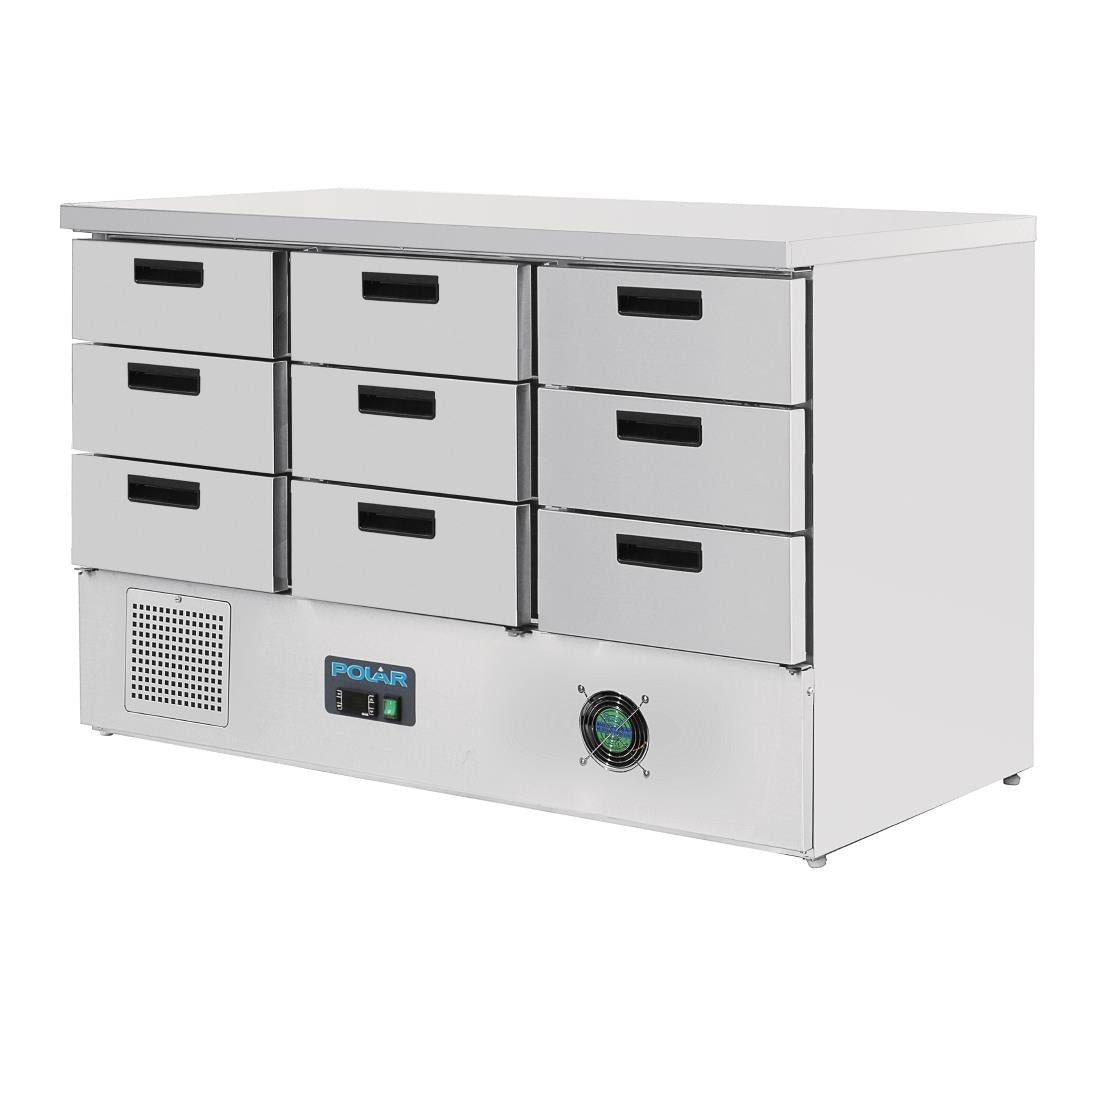 FA441 Polar G-Series Refrigerated Counter with 9 Drawers 368Ltr